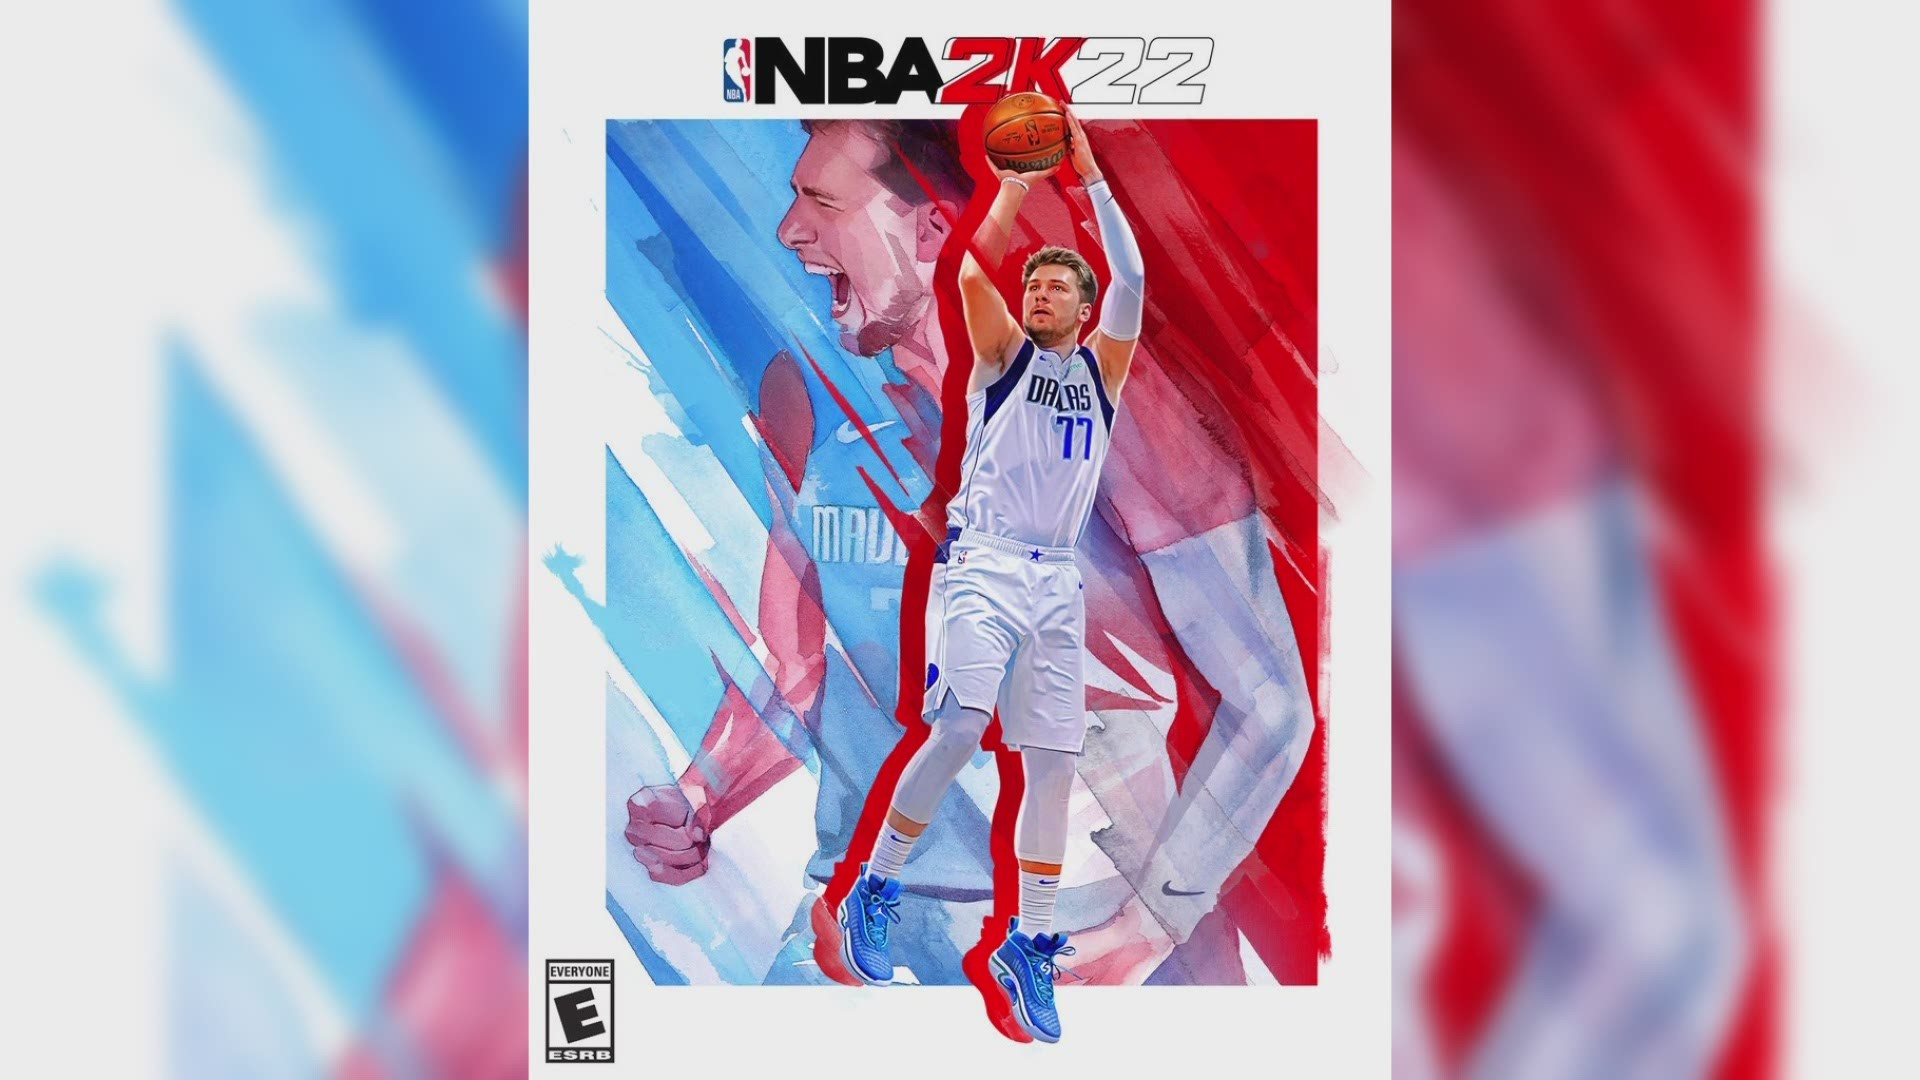 It's the first cover appearance for Dončić and Nowitzki.